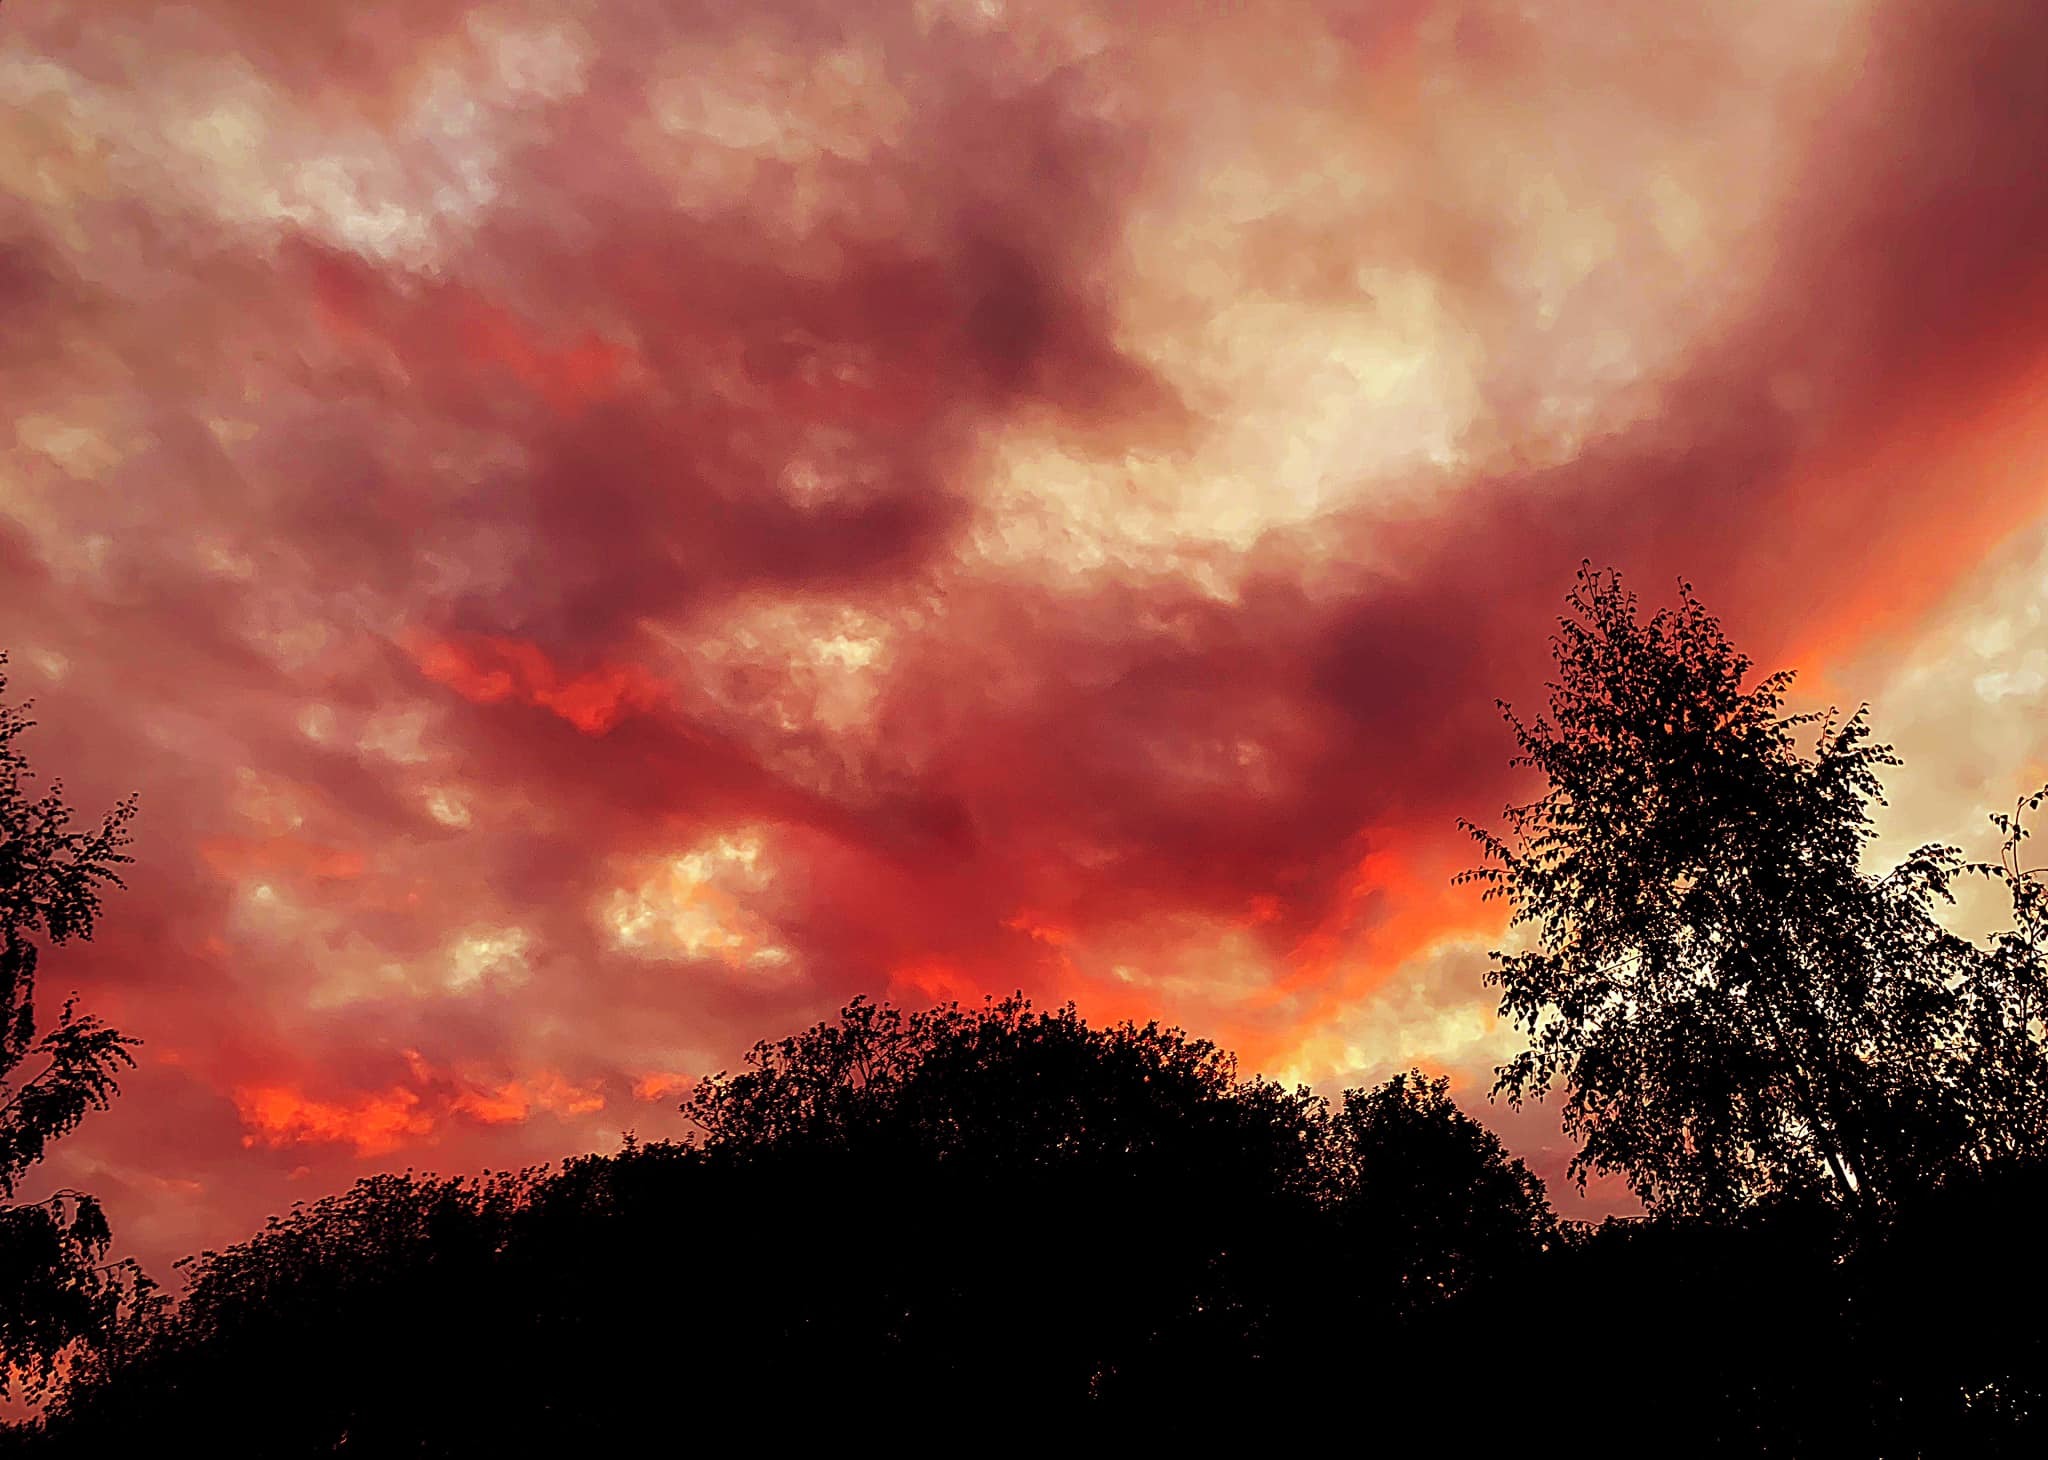 Sunset over Knutsford by Carly Jo Curbishley